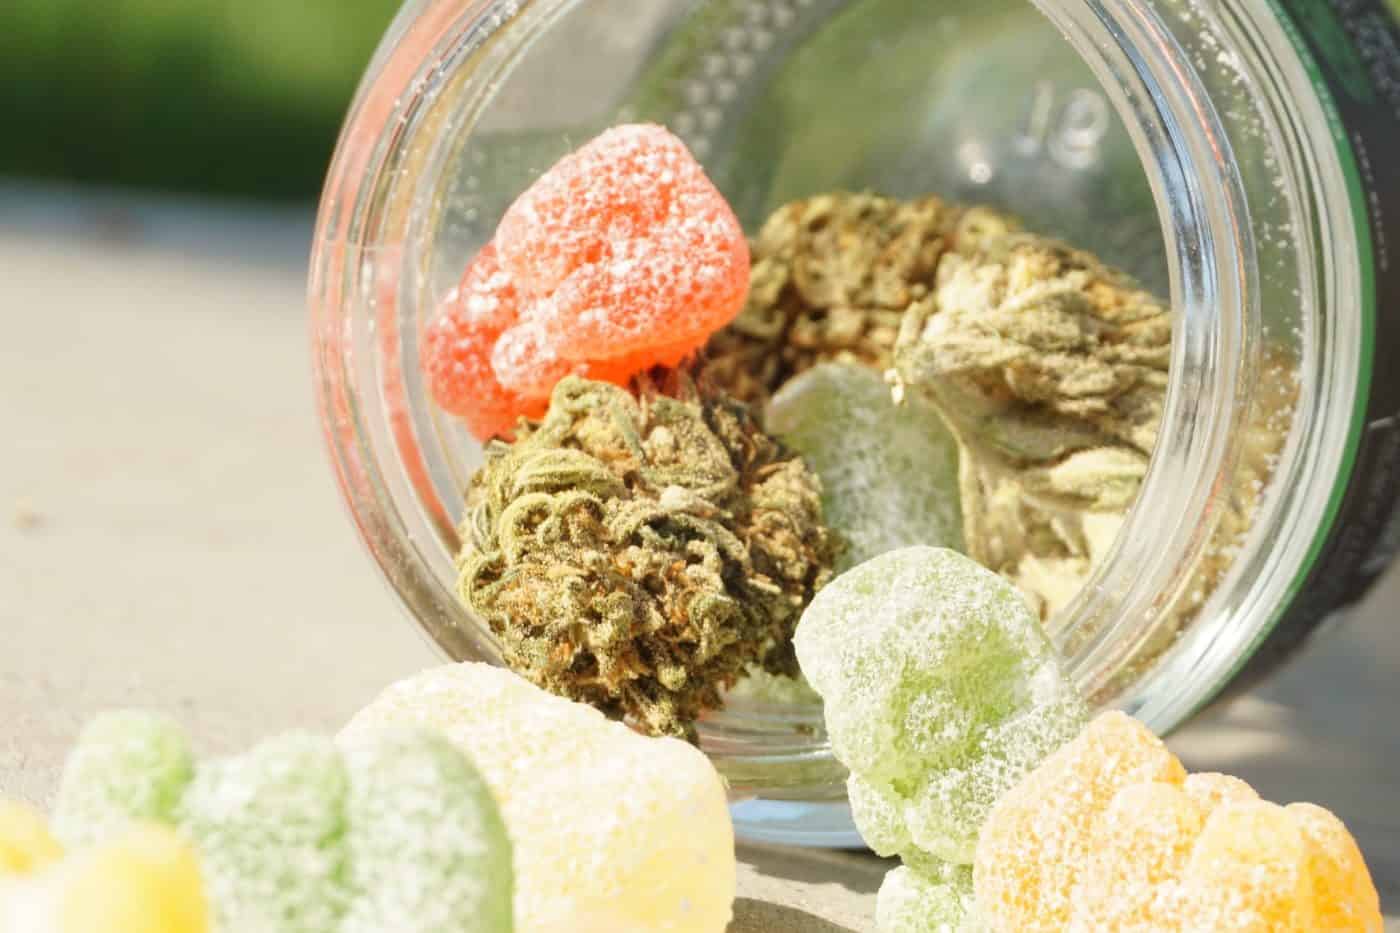 Edibles Mg Potency and Dosage Guide Chart for Beginners